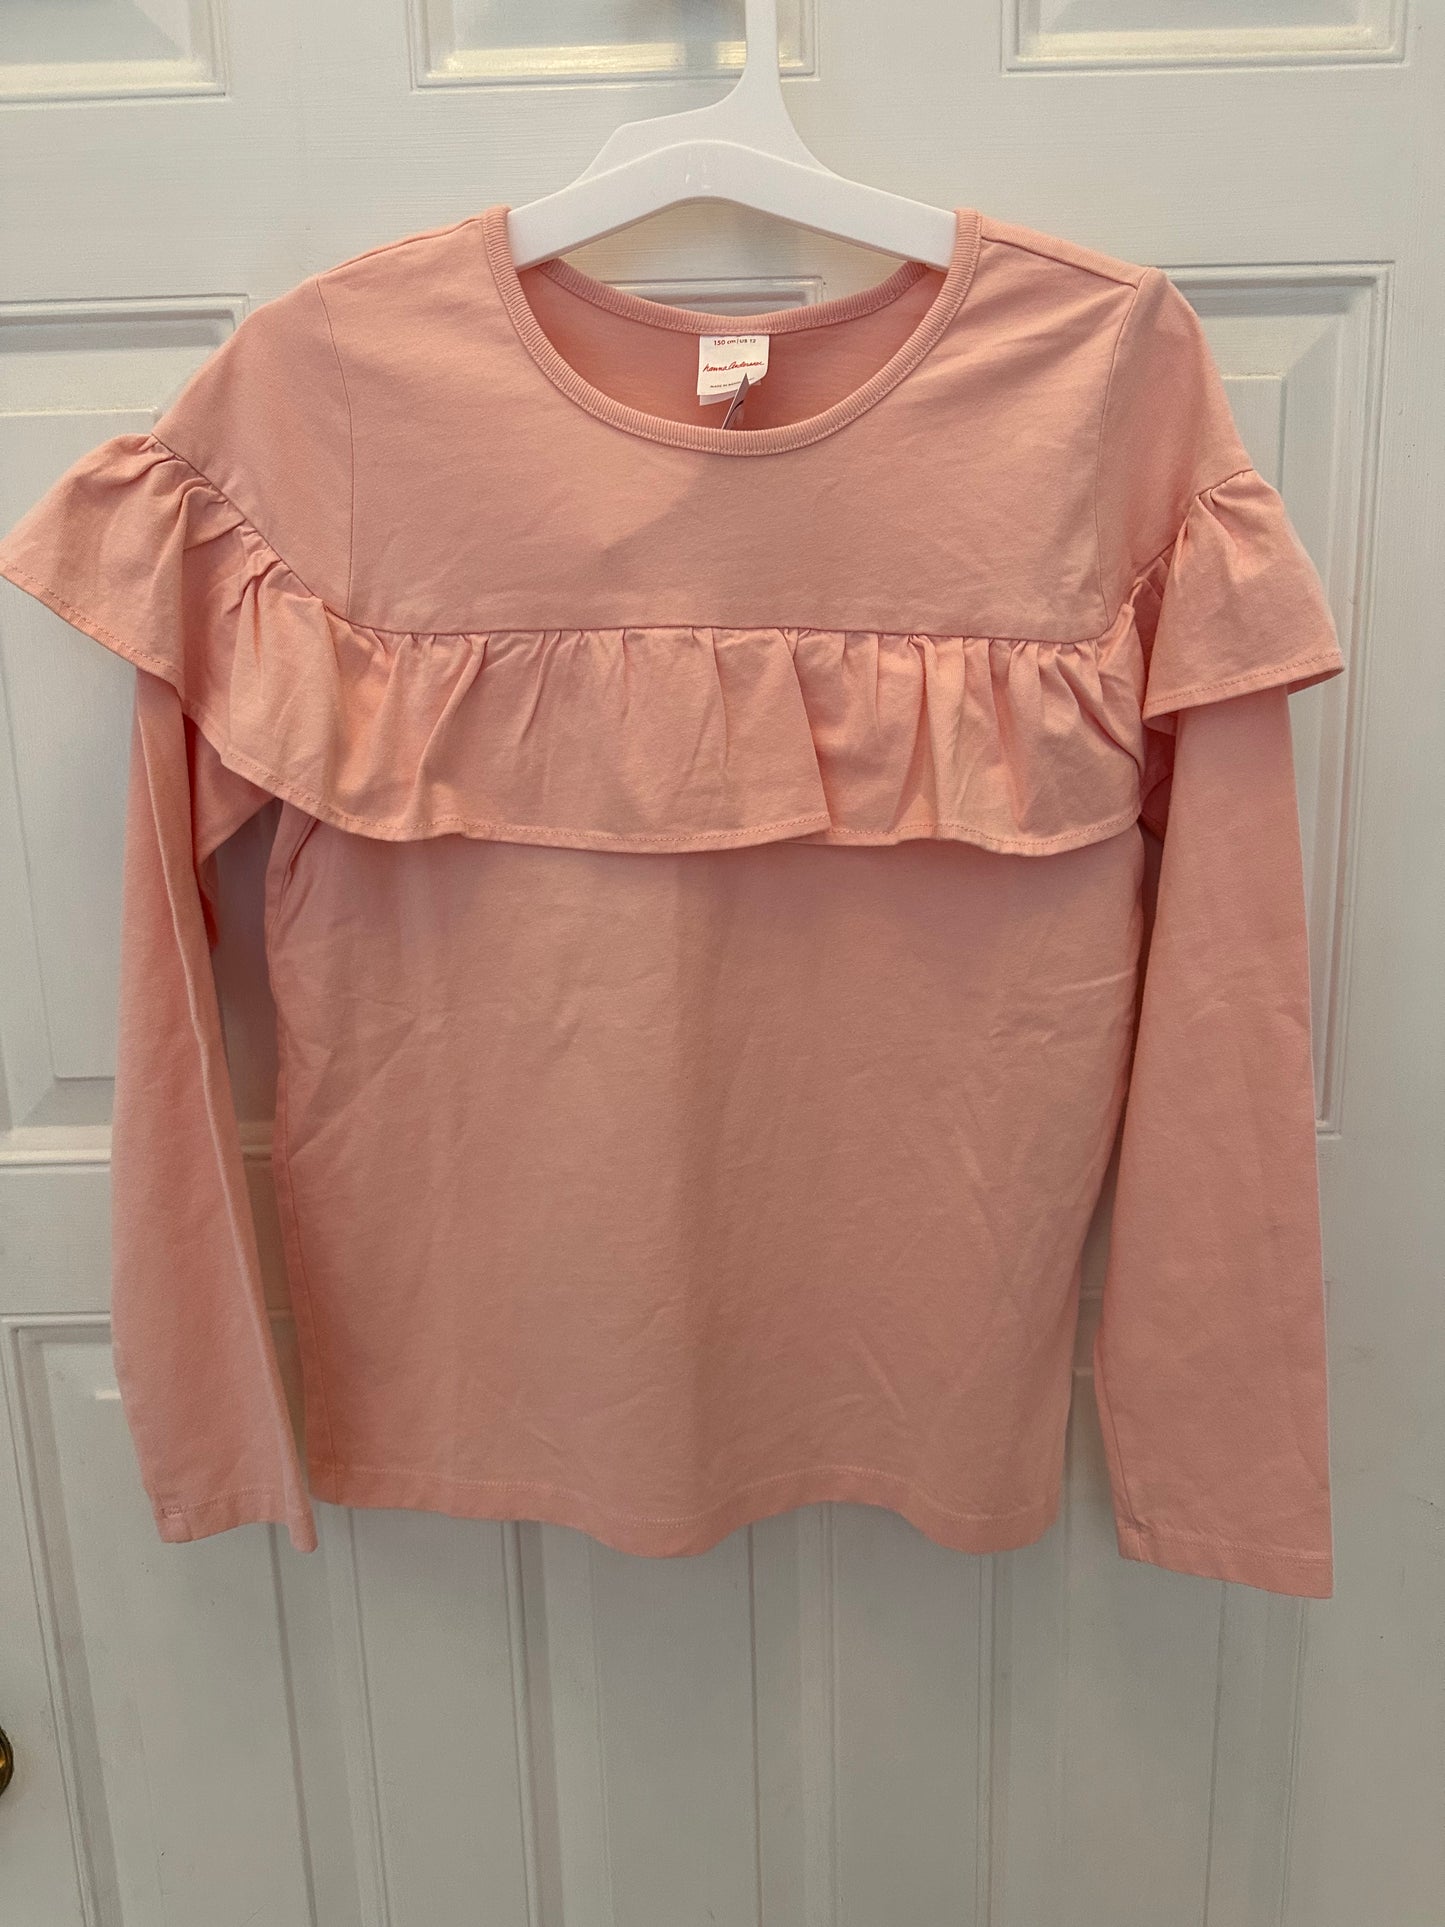 NWOT Hanna Andersson Girls Sz 150 (12) pink top